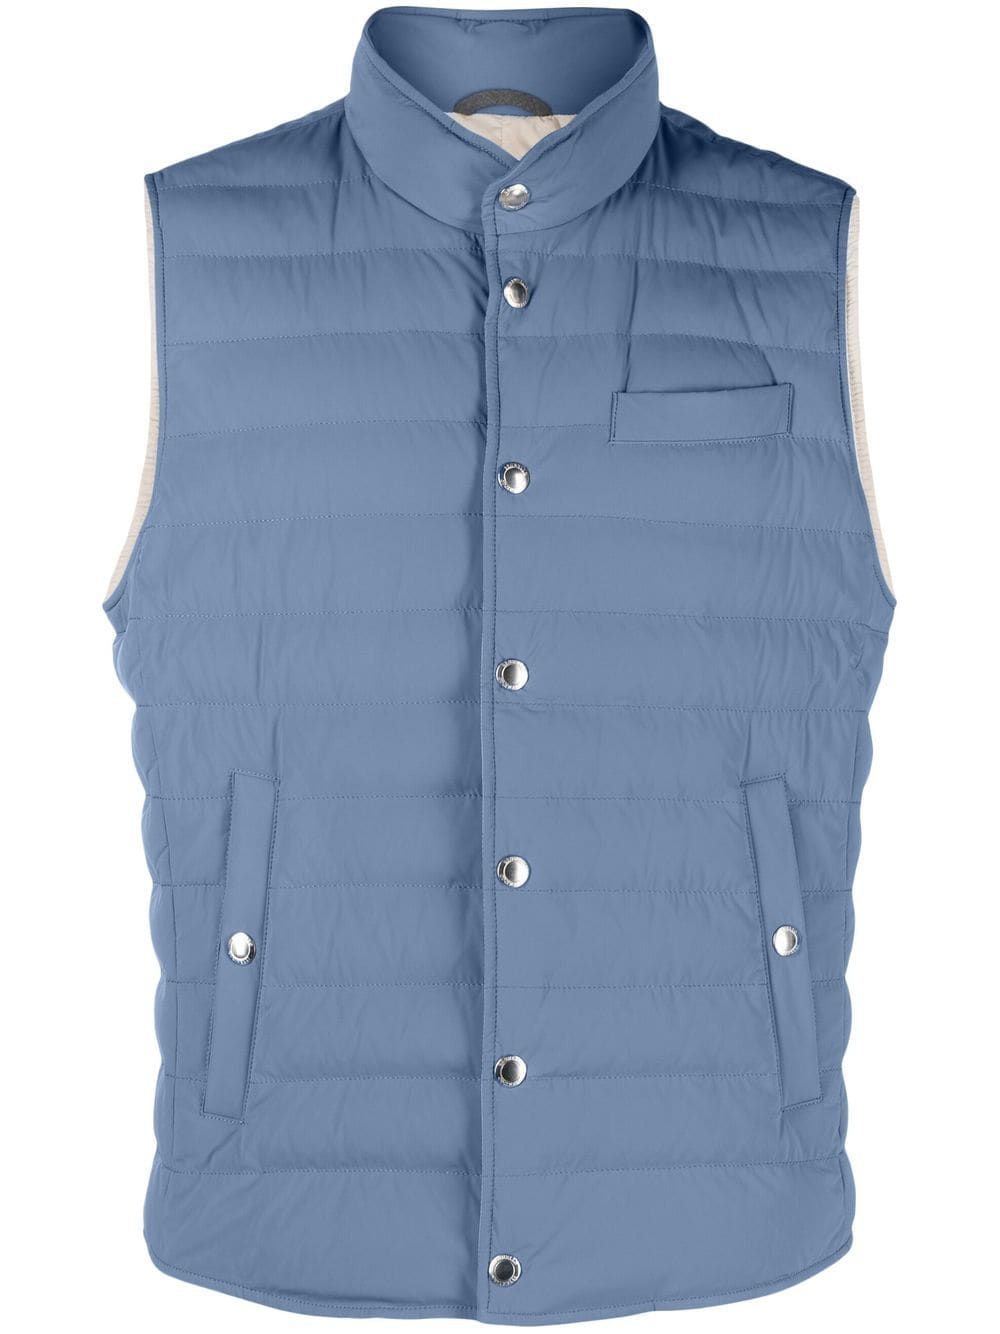 quilted down gilet